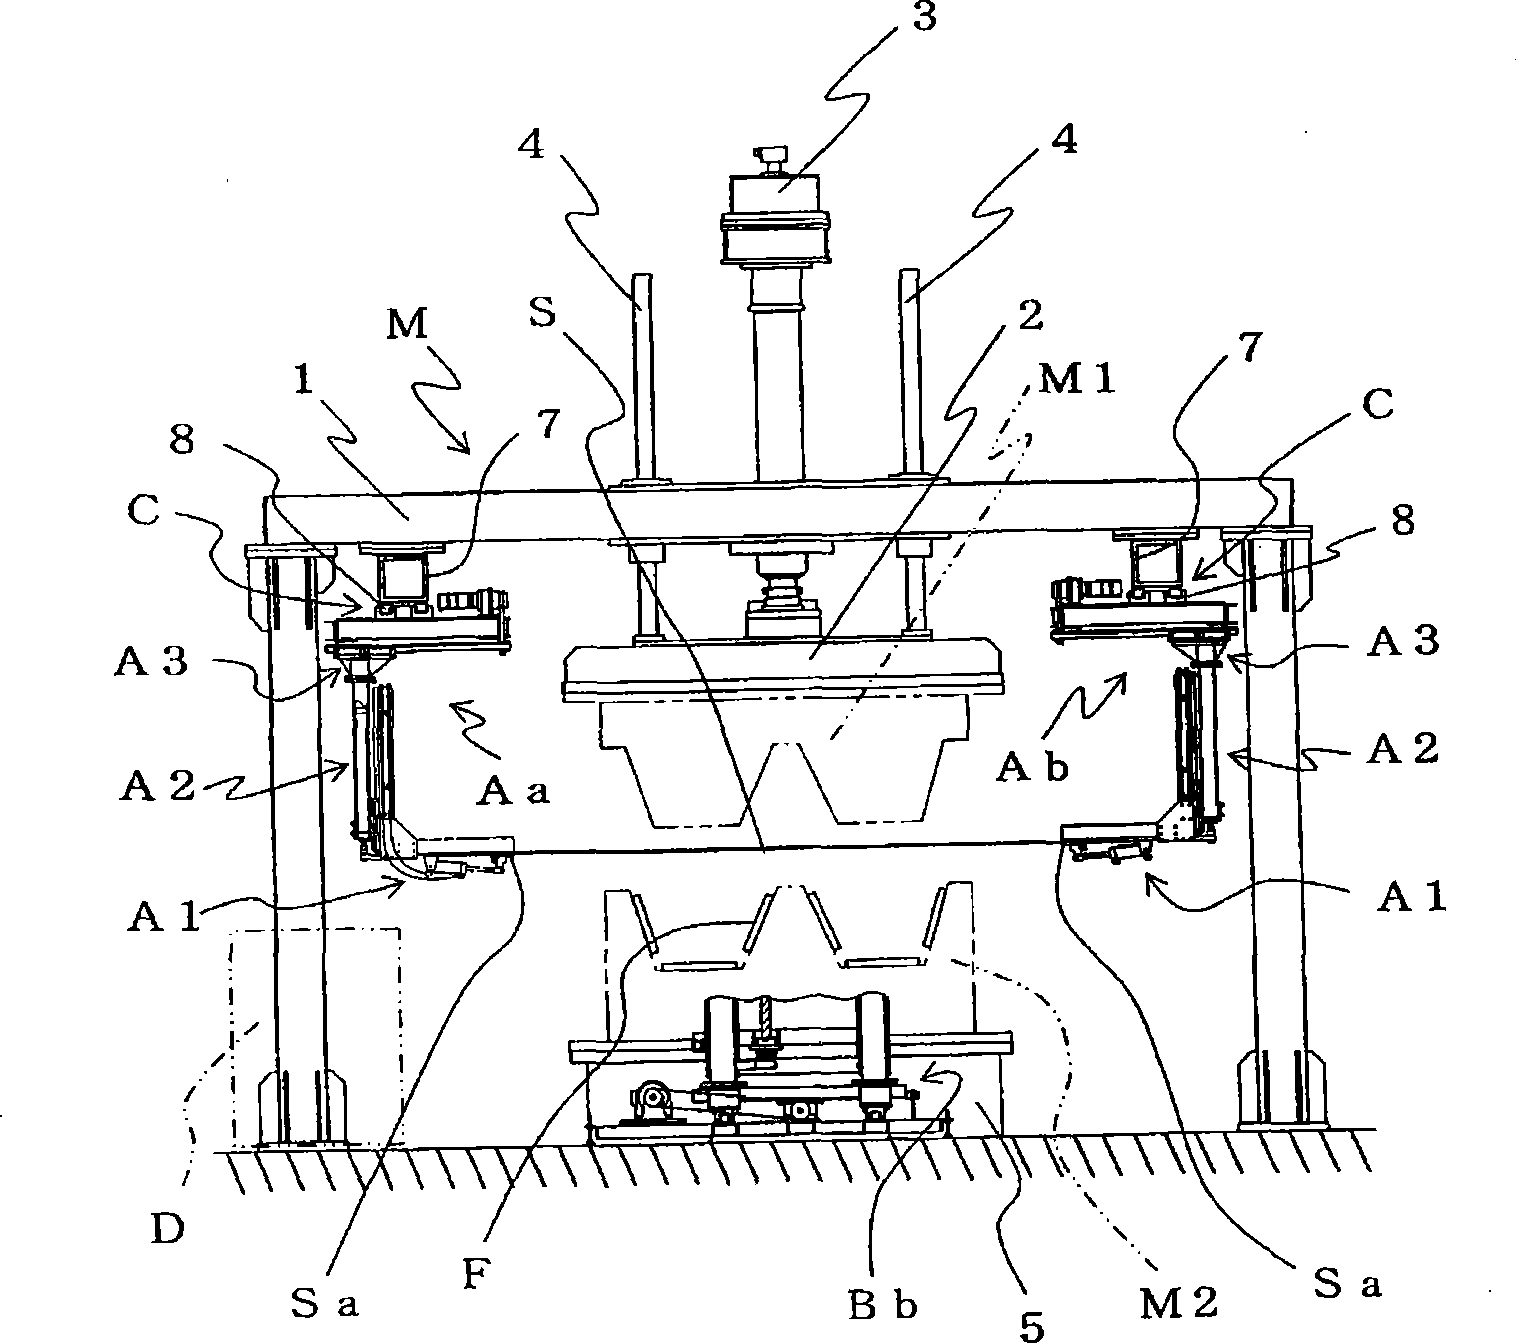 Method of clamping material and a material-clamping unit used therefor